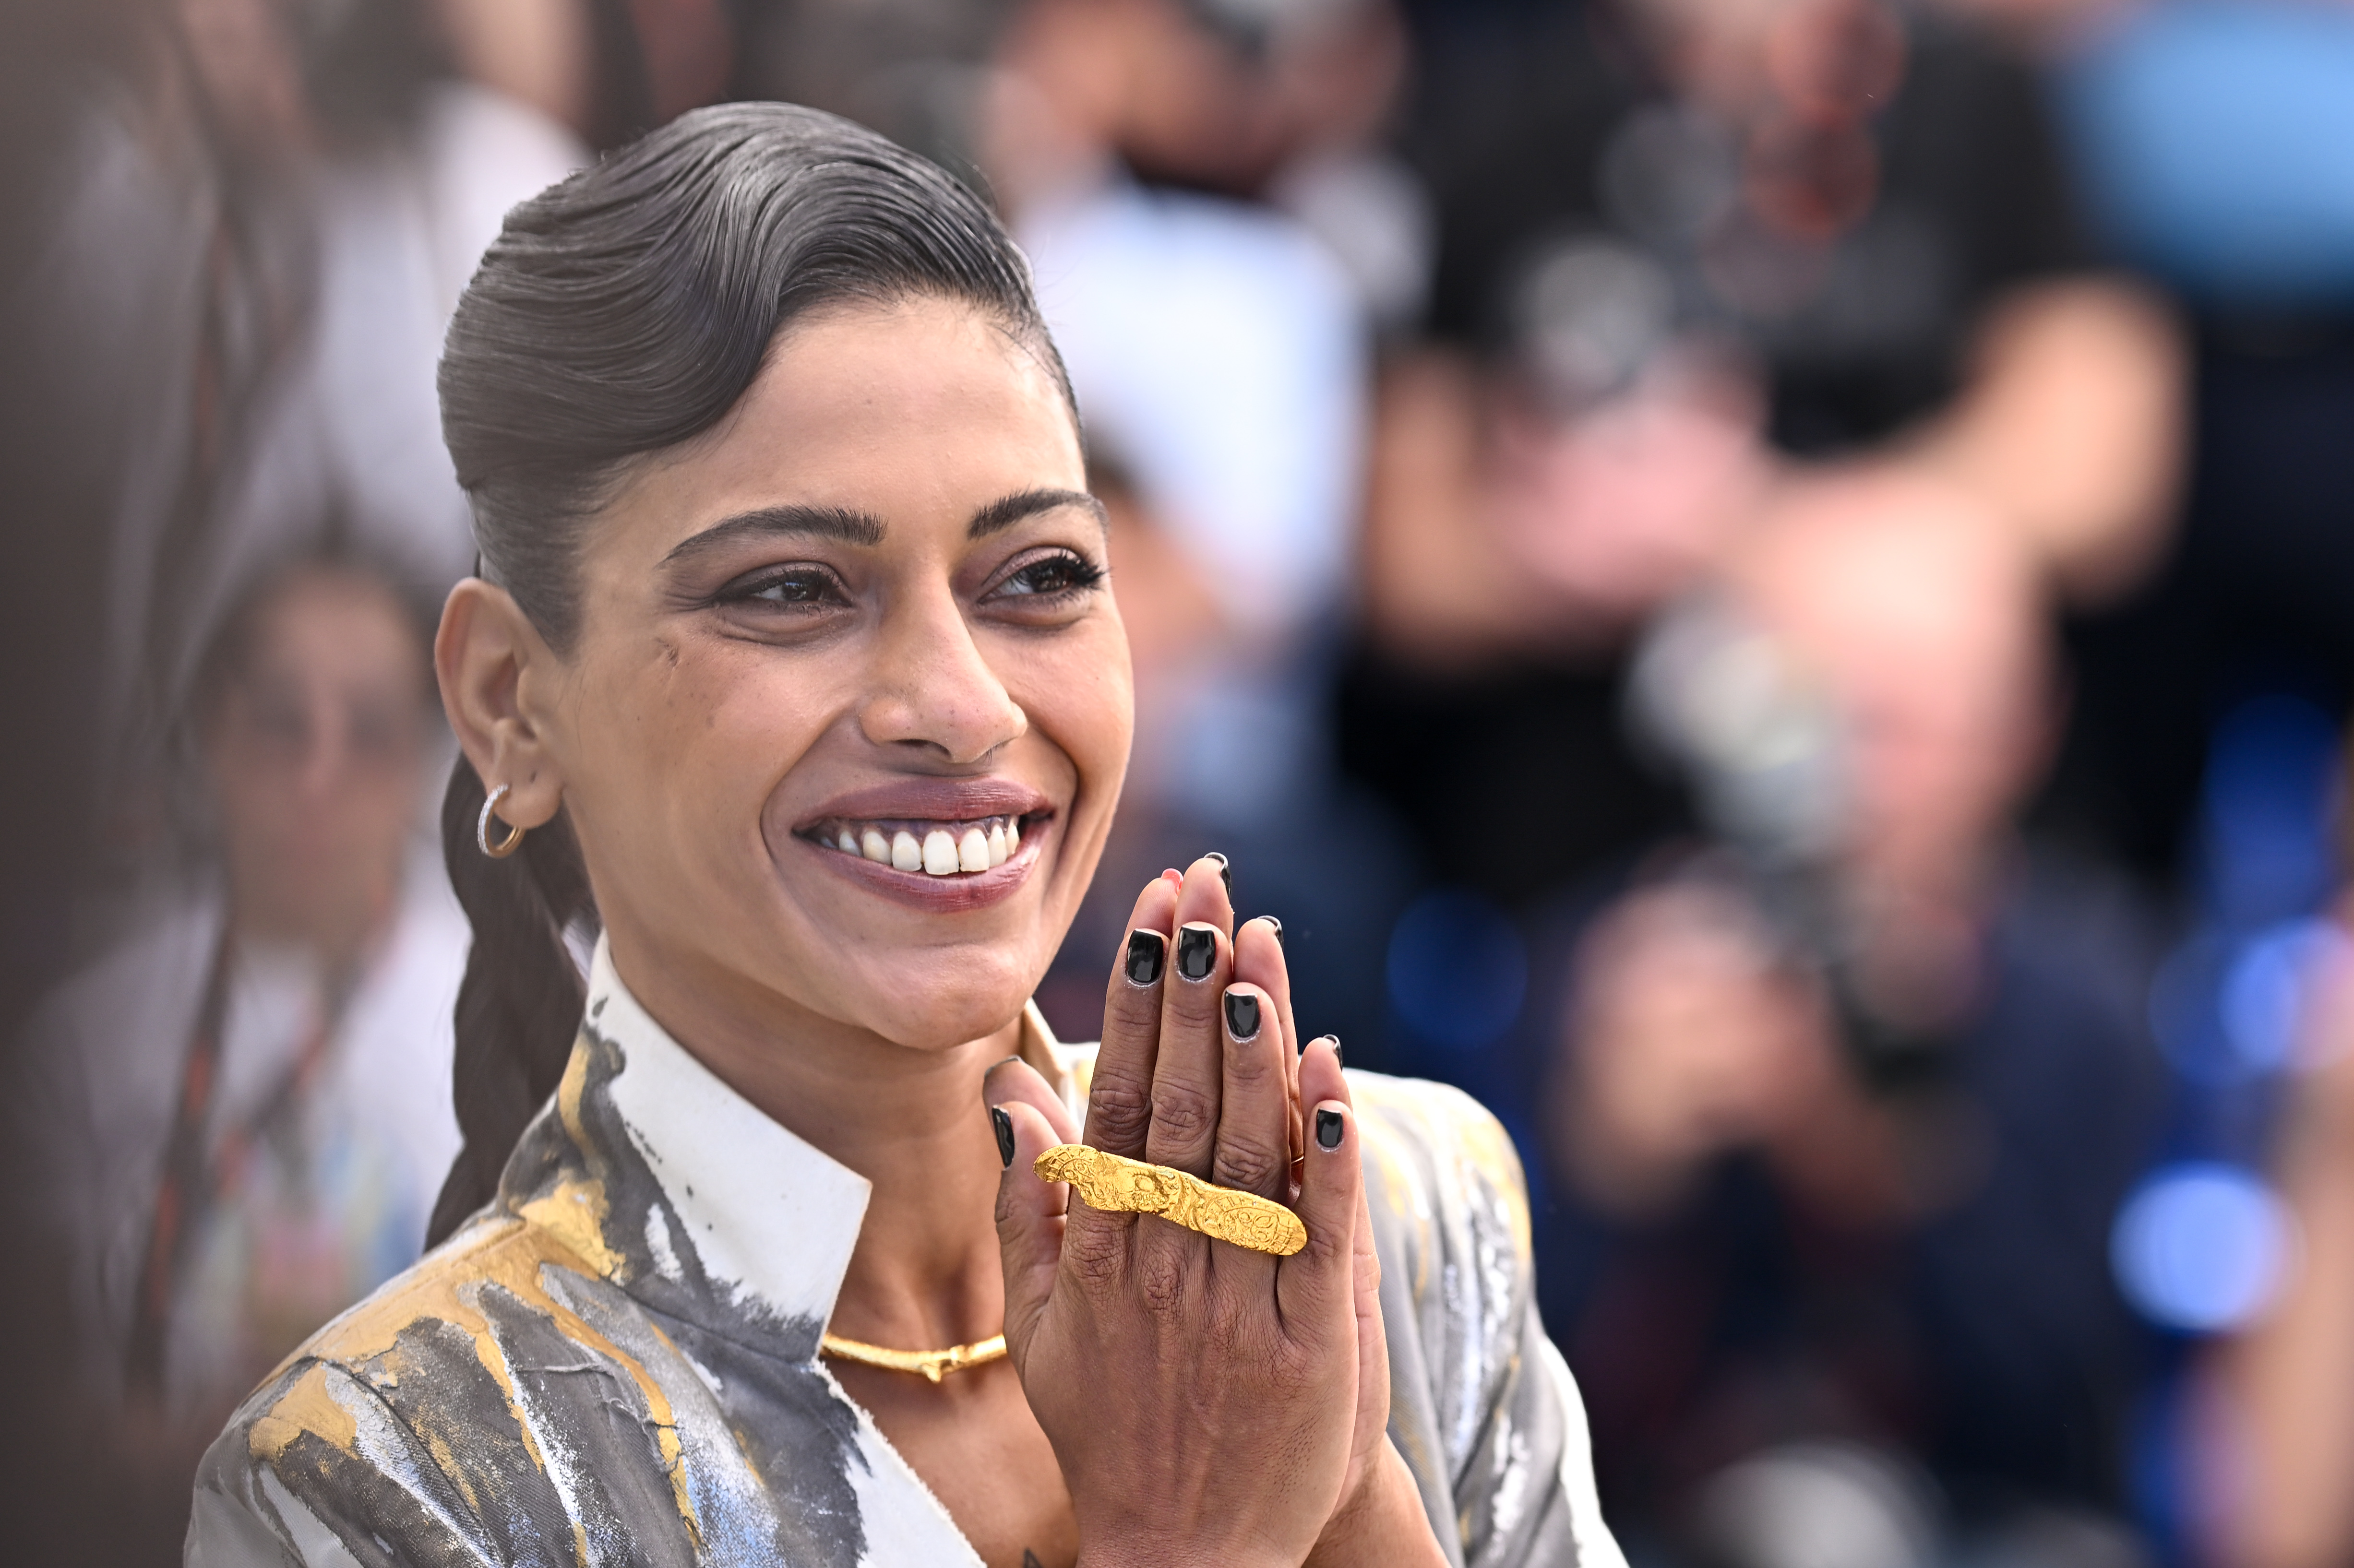 Anasuya Sengupta, first Indian to bag Best Actress award at Cannes, dedicates her historic win to queer and marginalised communities. Hailing from Kolkata, Anasuya bagged the Best Actress award in Un Certain Regard for her role in The Shameless, helmed by Bulgarian director Konstantin Bojanov.